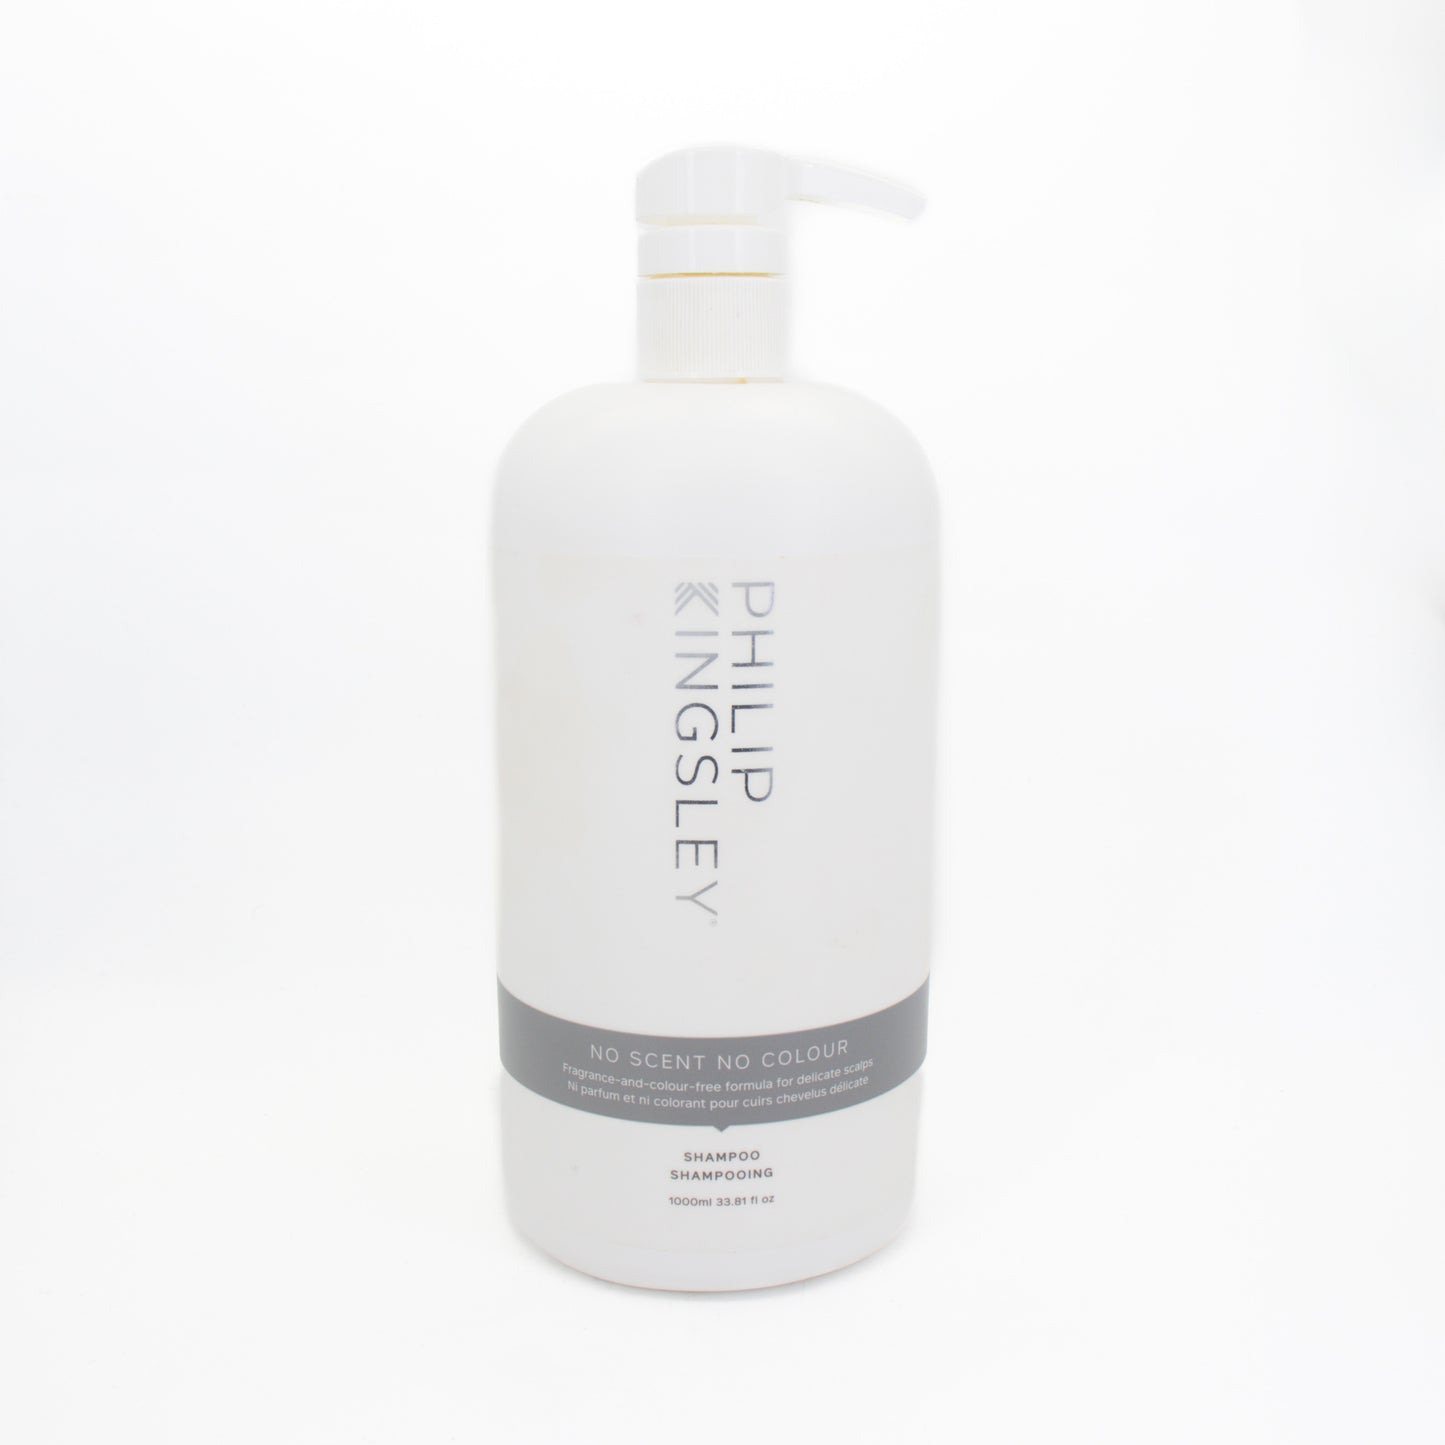 Philip Kingsley No Scent No Colour Shampoo 1000ml - Imperfect Container - This is Beauty UK